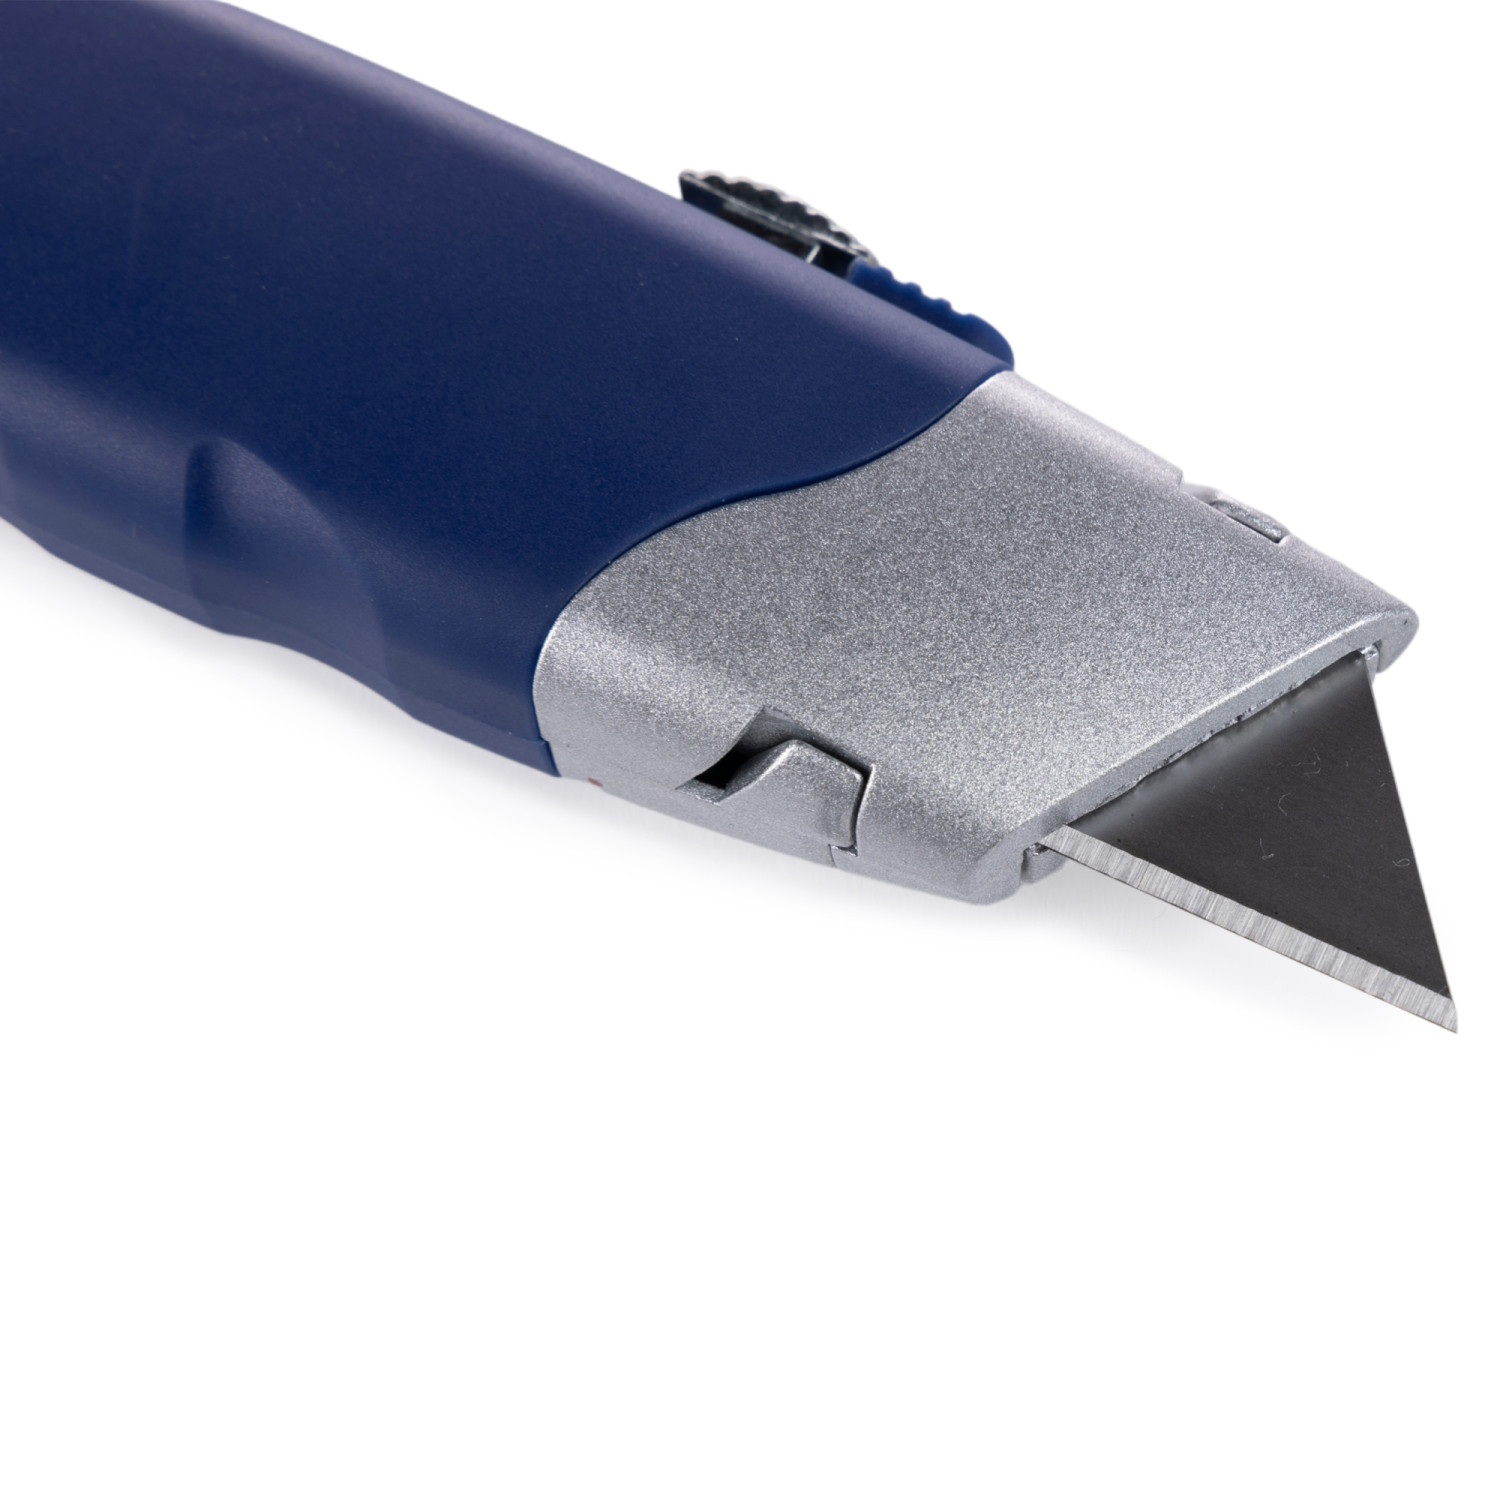 IDL Packaging IDL-190 HD Retractable Box Cutter with Scoring Wheel